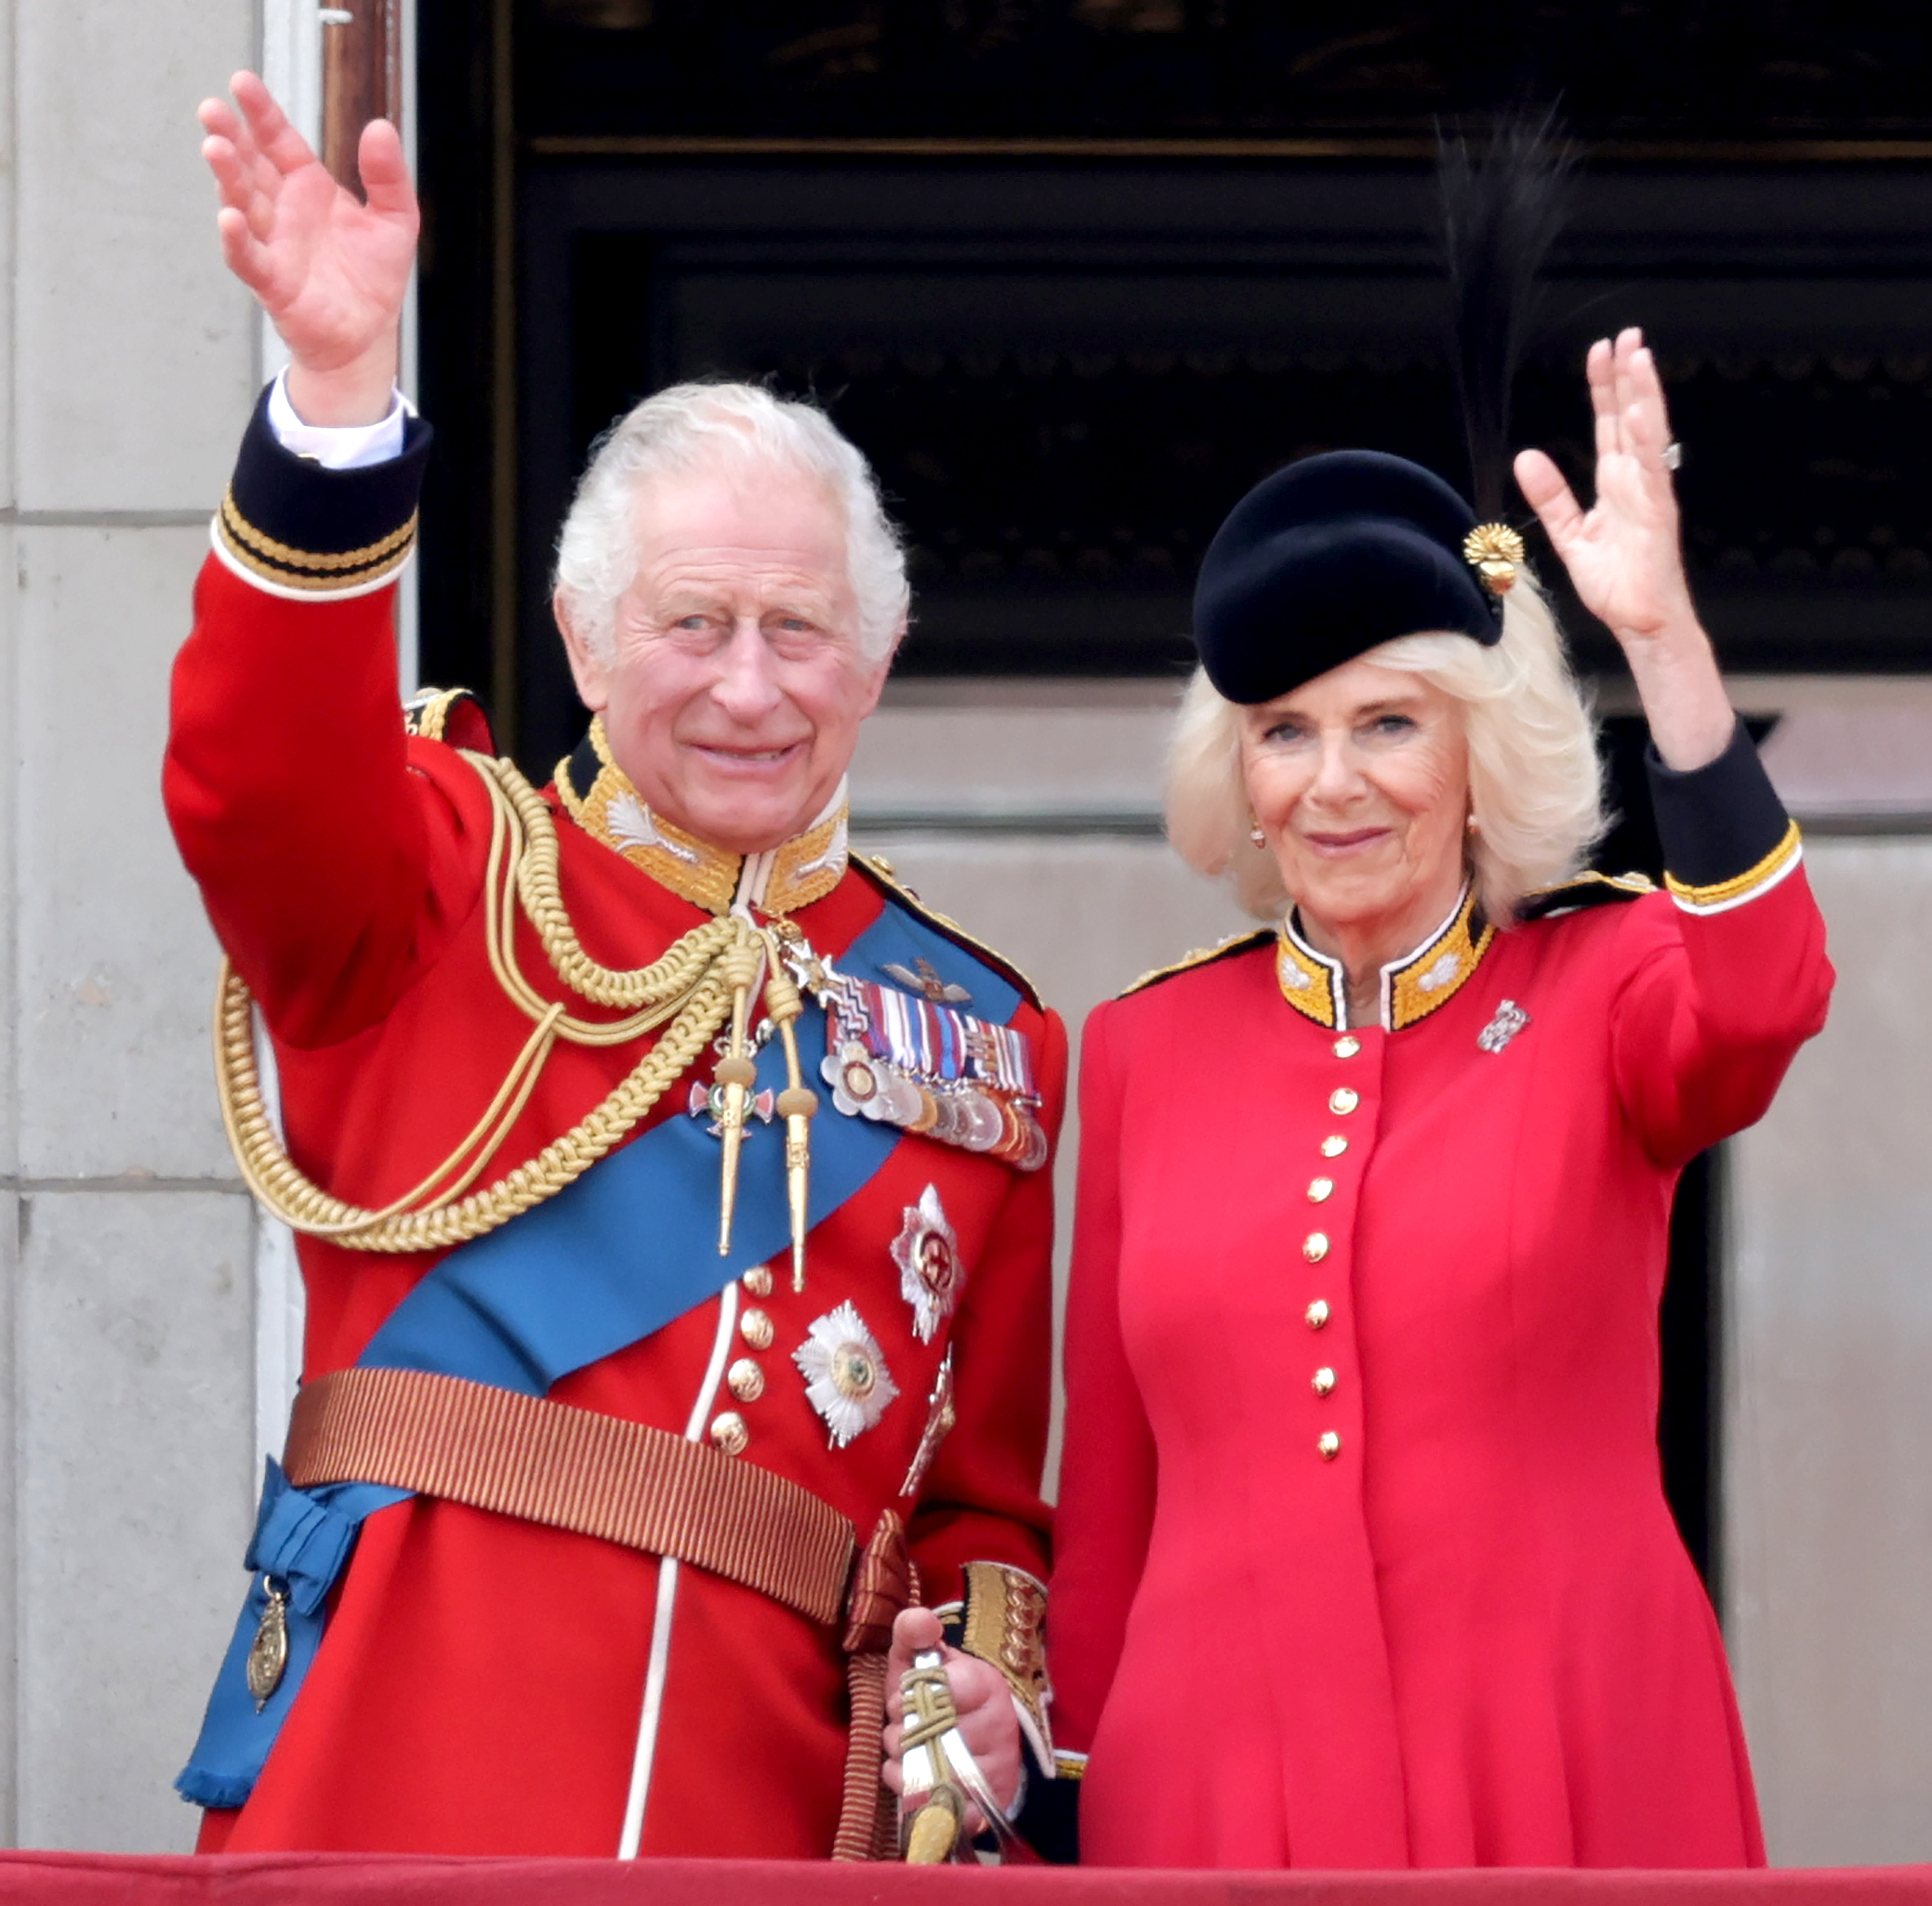 <p>King Charles III and Queen Camilla waved to the crowd from the balcony of Buckingham Palace in London while watching a fly-past of Royal Air Force aircraft during <a href="https://www.wonderwall.com/celebrity/royals/trooping-the-colour-2023-king-charles-iii-celebrates-the-first-of-his-reign-752078.gallery">Trooping the Colour</a> -- the first of his reign -- on June 17, 2023. Trooping the Colour is a traditional parade held to mark the British sovereign's official birthday.</p>